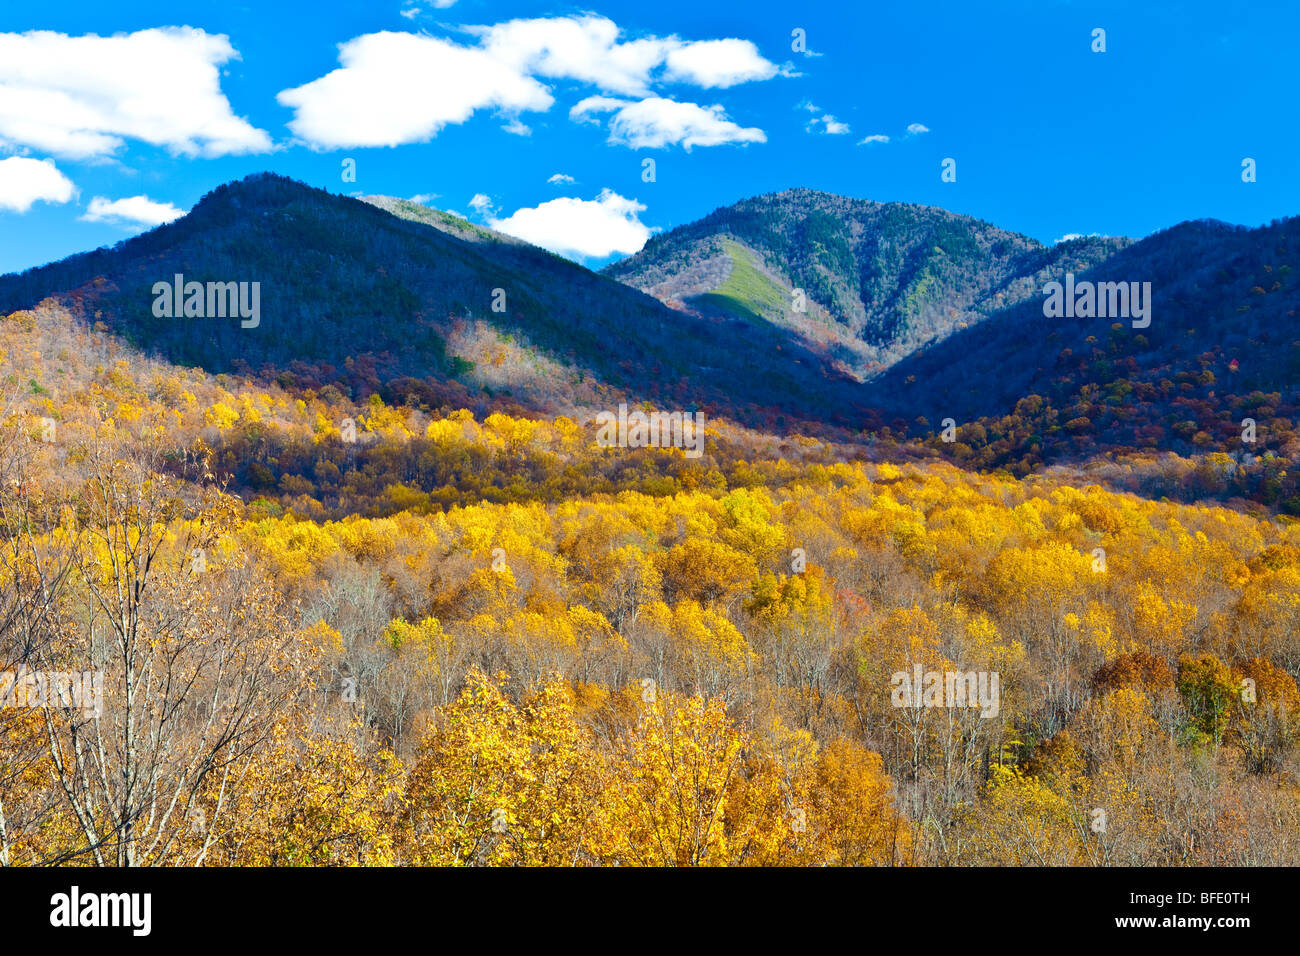 Vista desde Newfound Gap Road, Great Smoky Mountains National Park, Tennessee Foto de stock